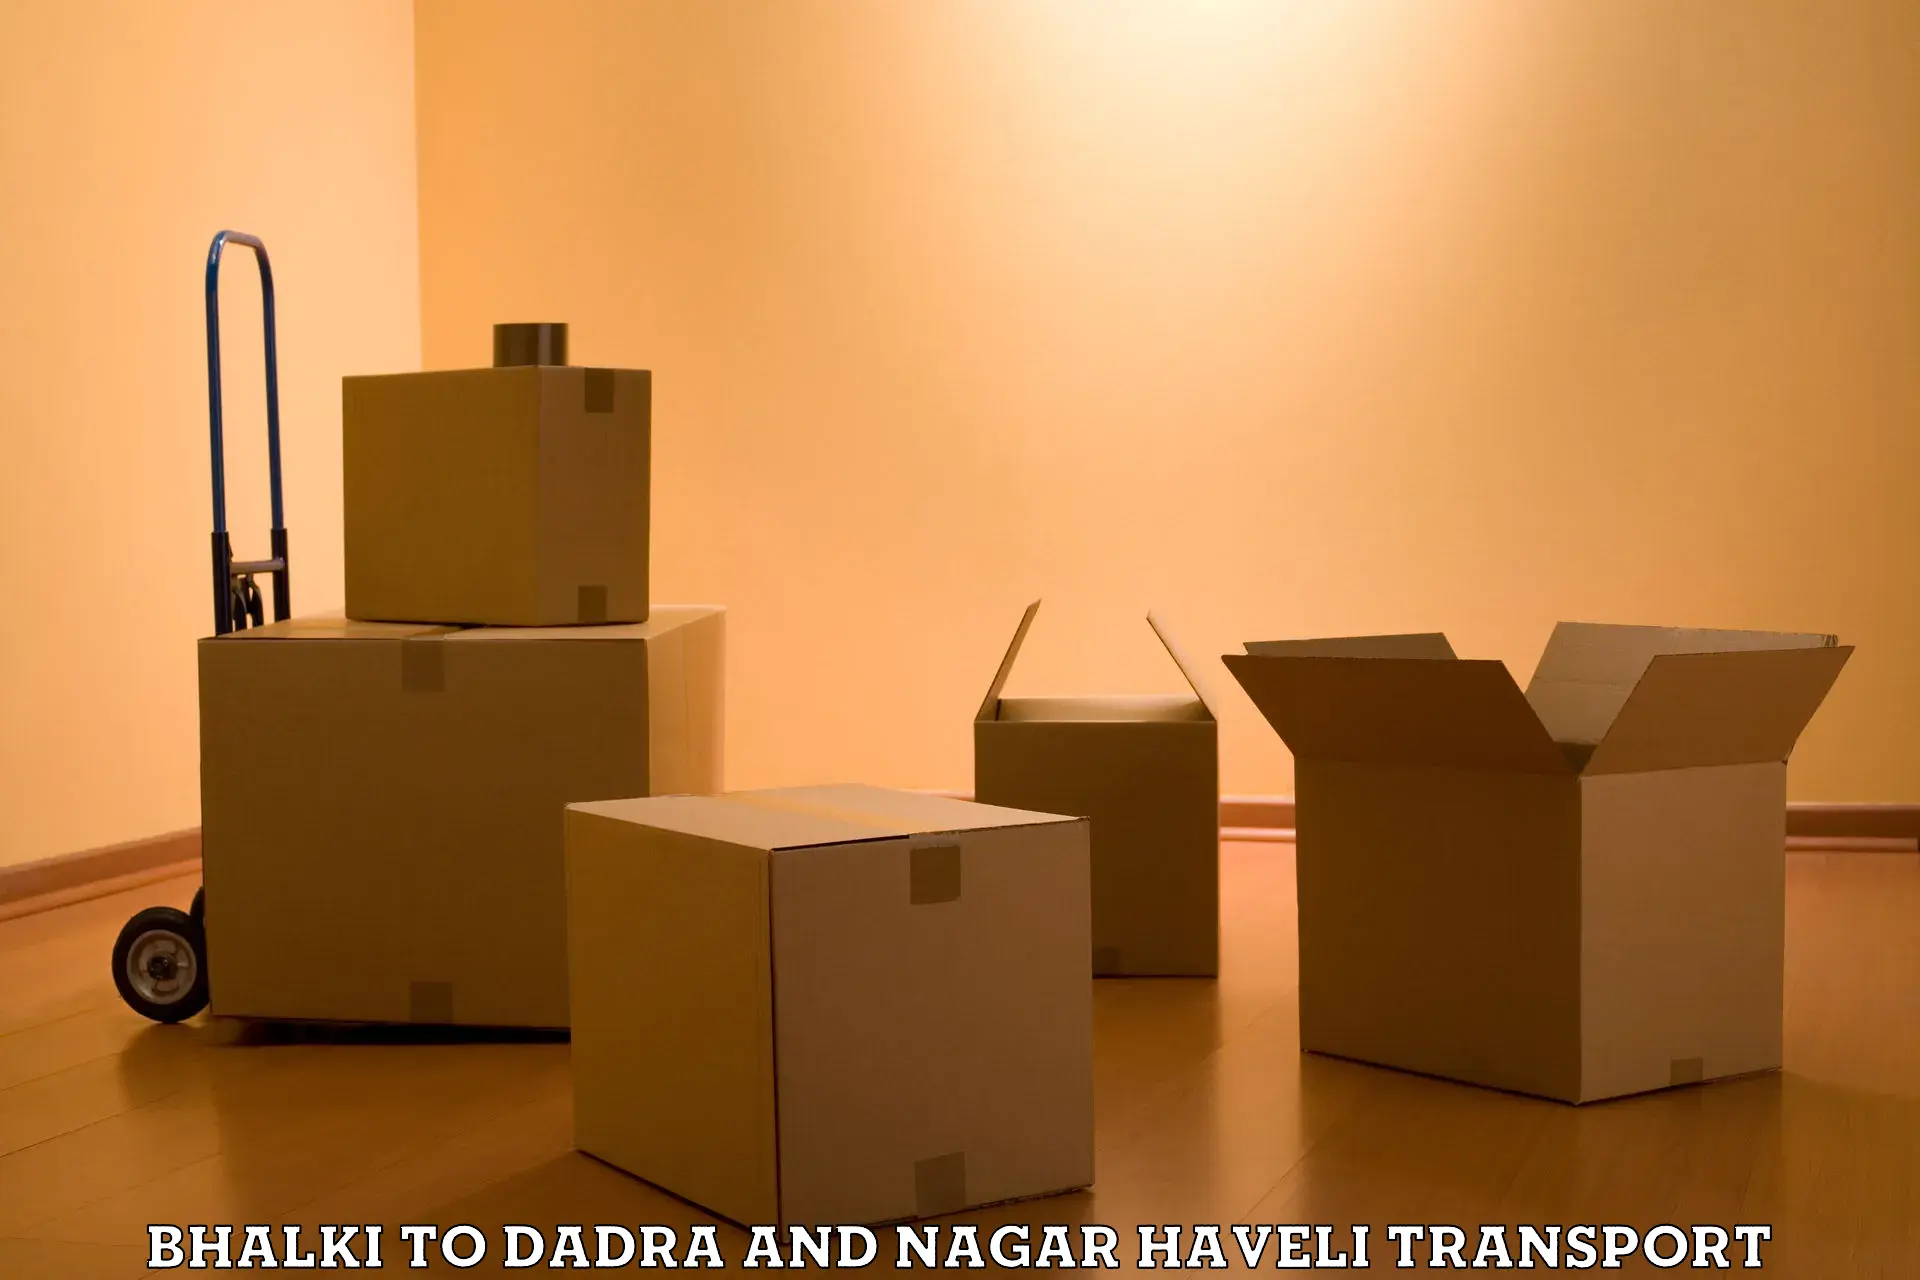 Nationwide transport services in Bhalki to Dadra and Nagar Haveli